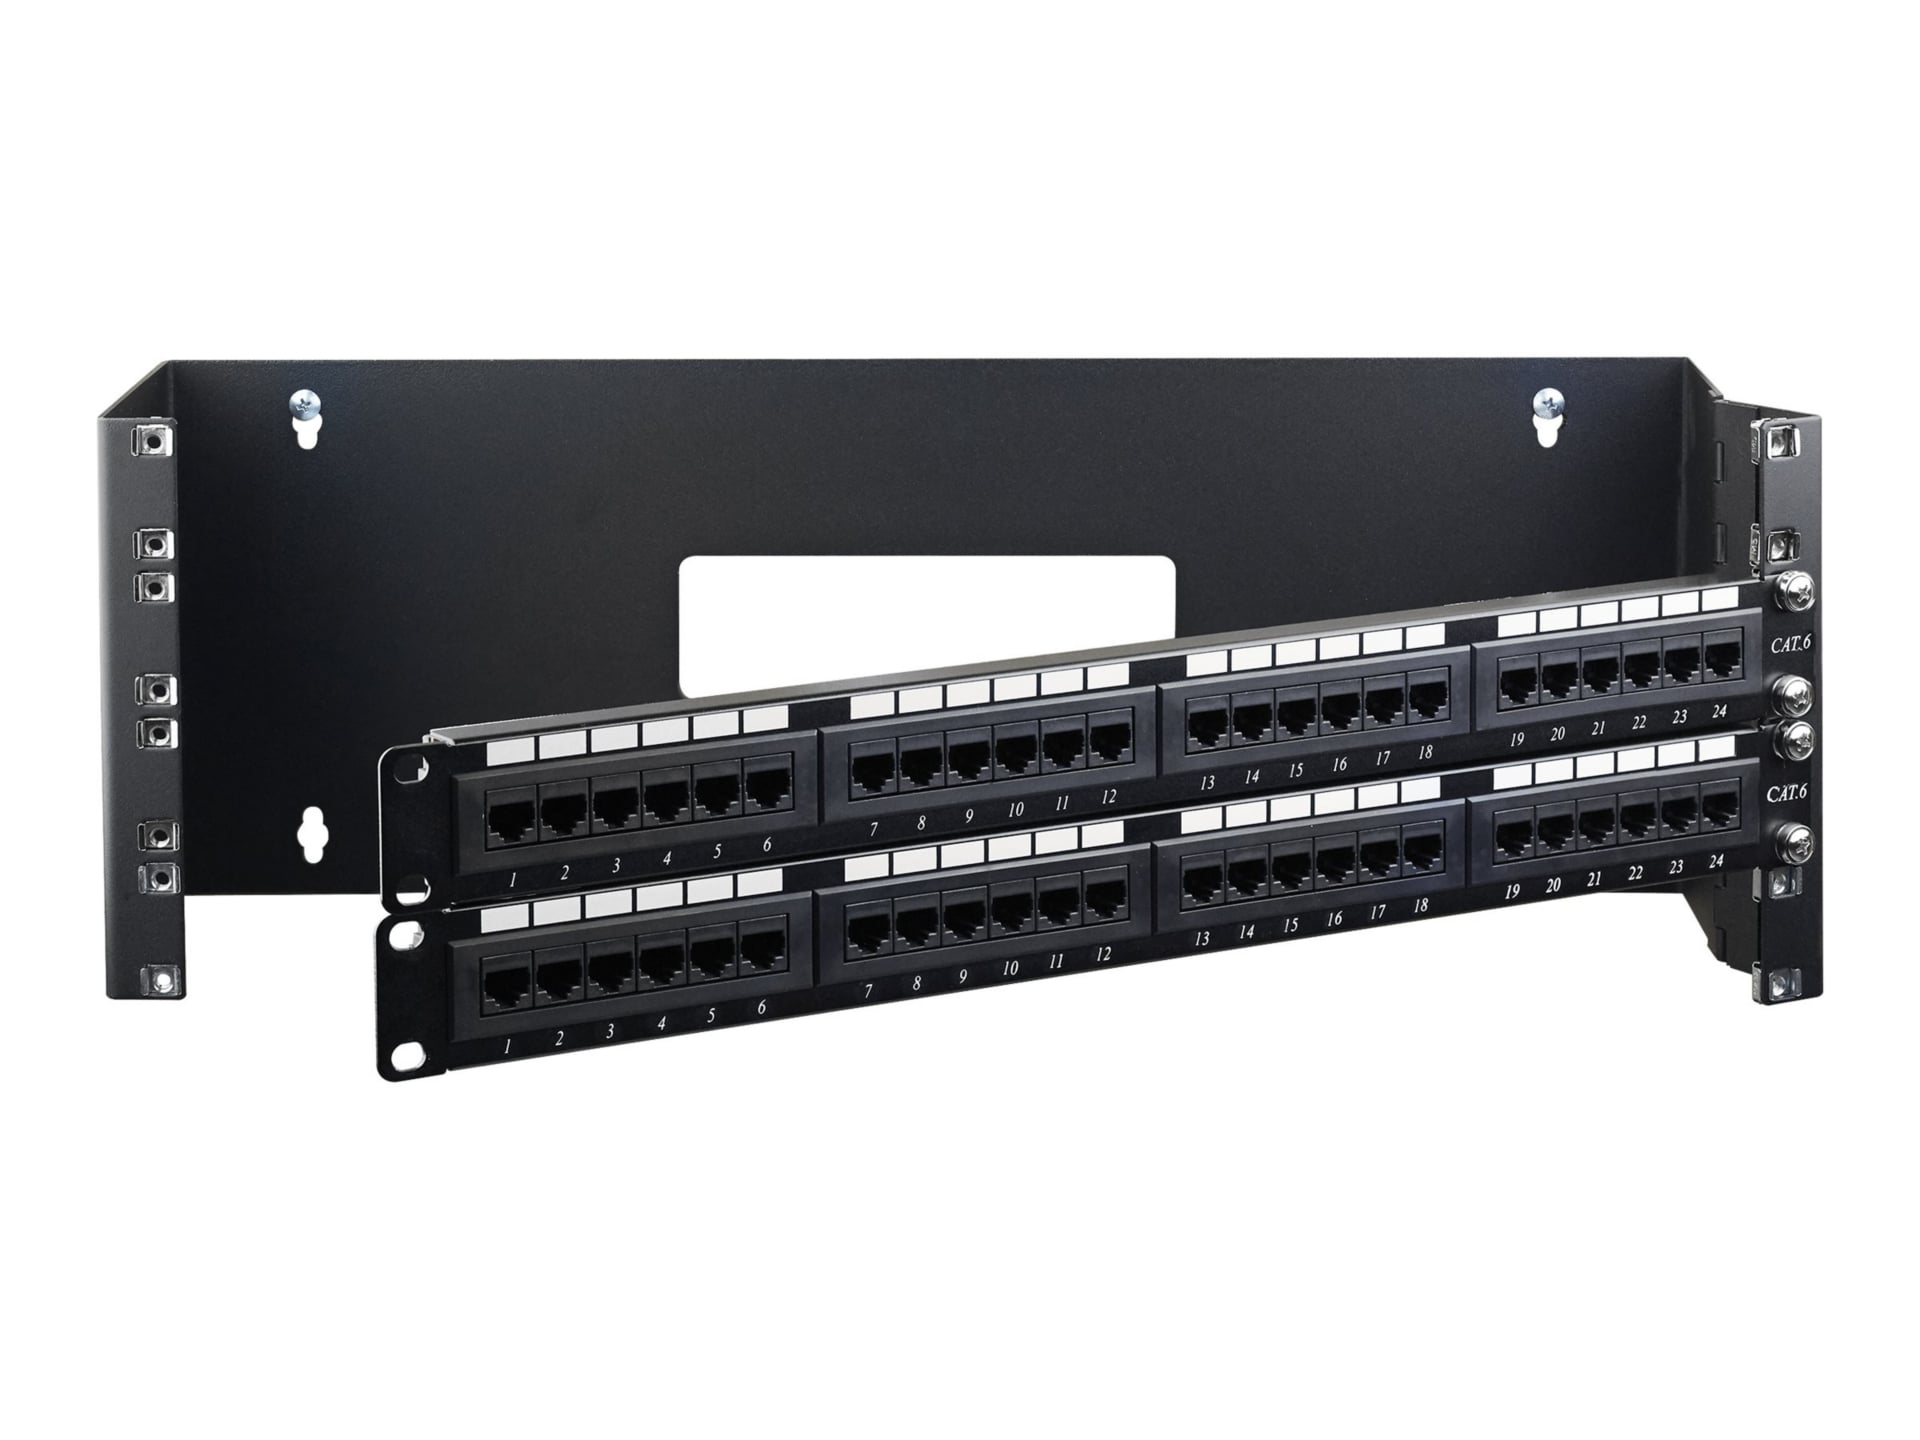 StarTech.com 4U 19in Hinged Wallmounting Bracket for Patch Panels